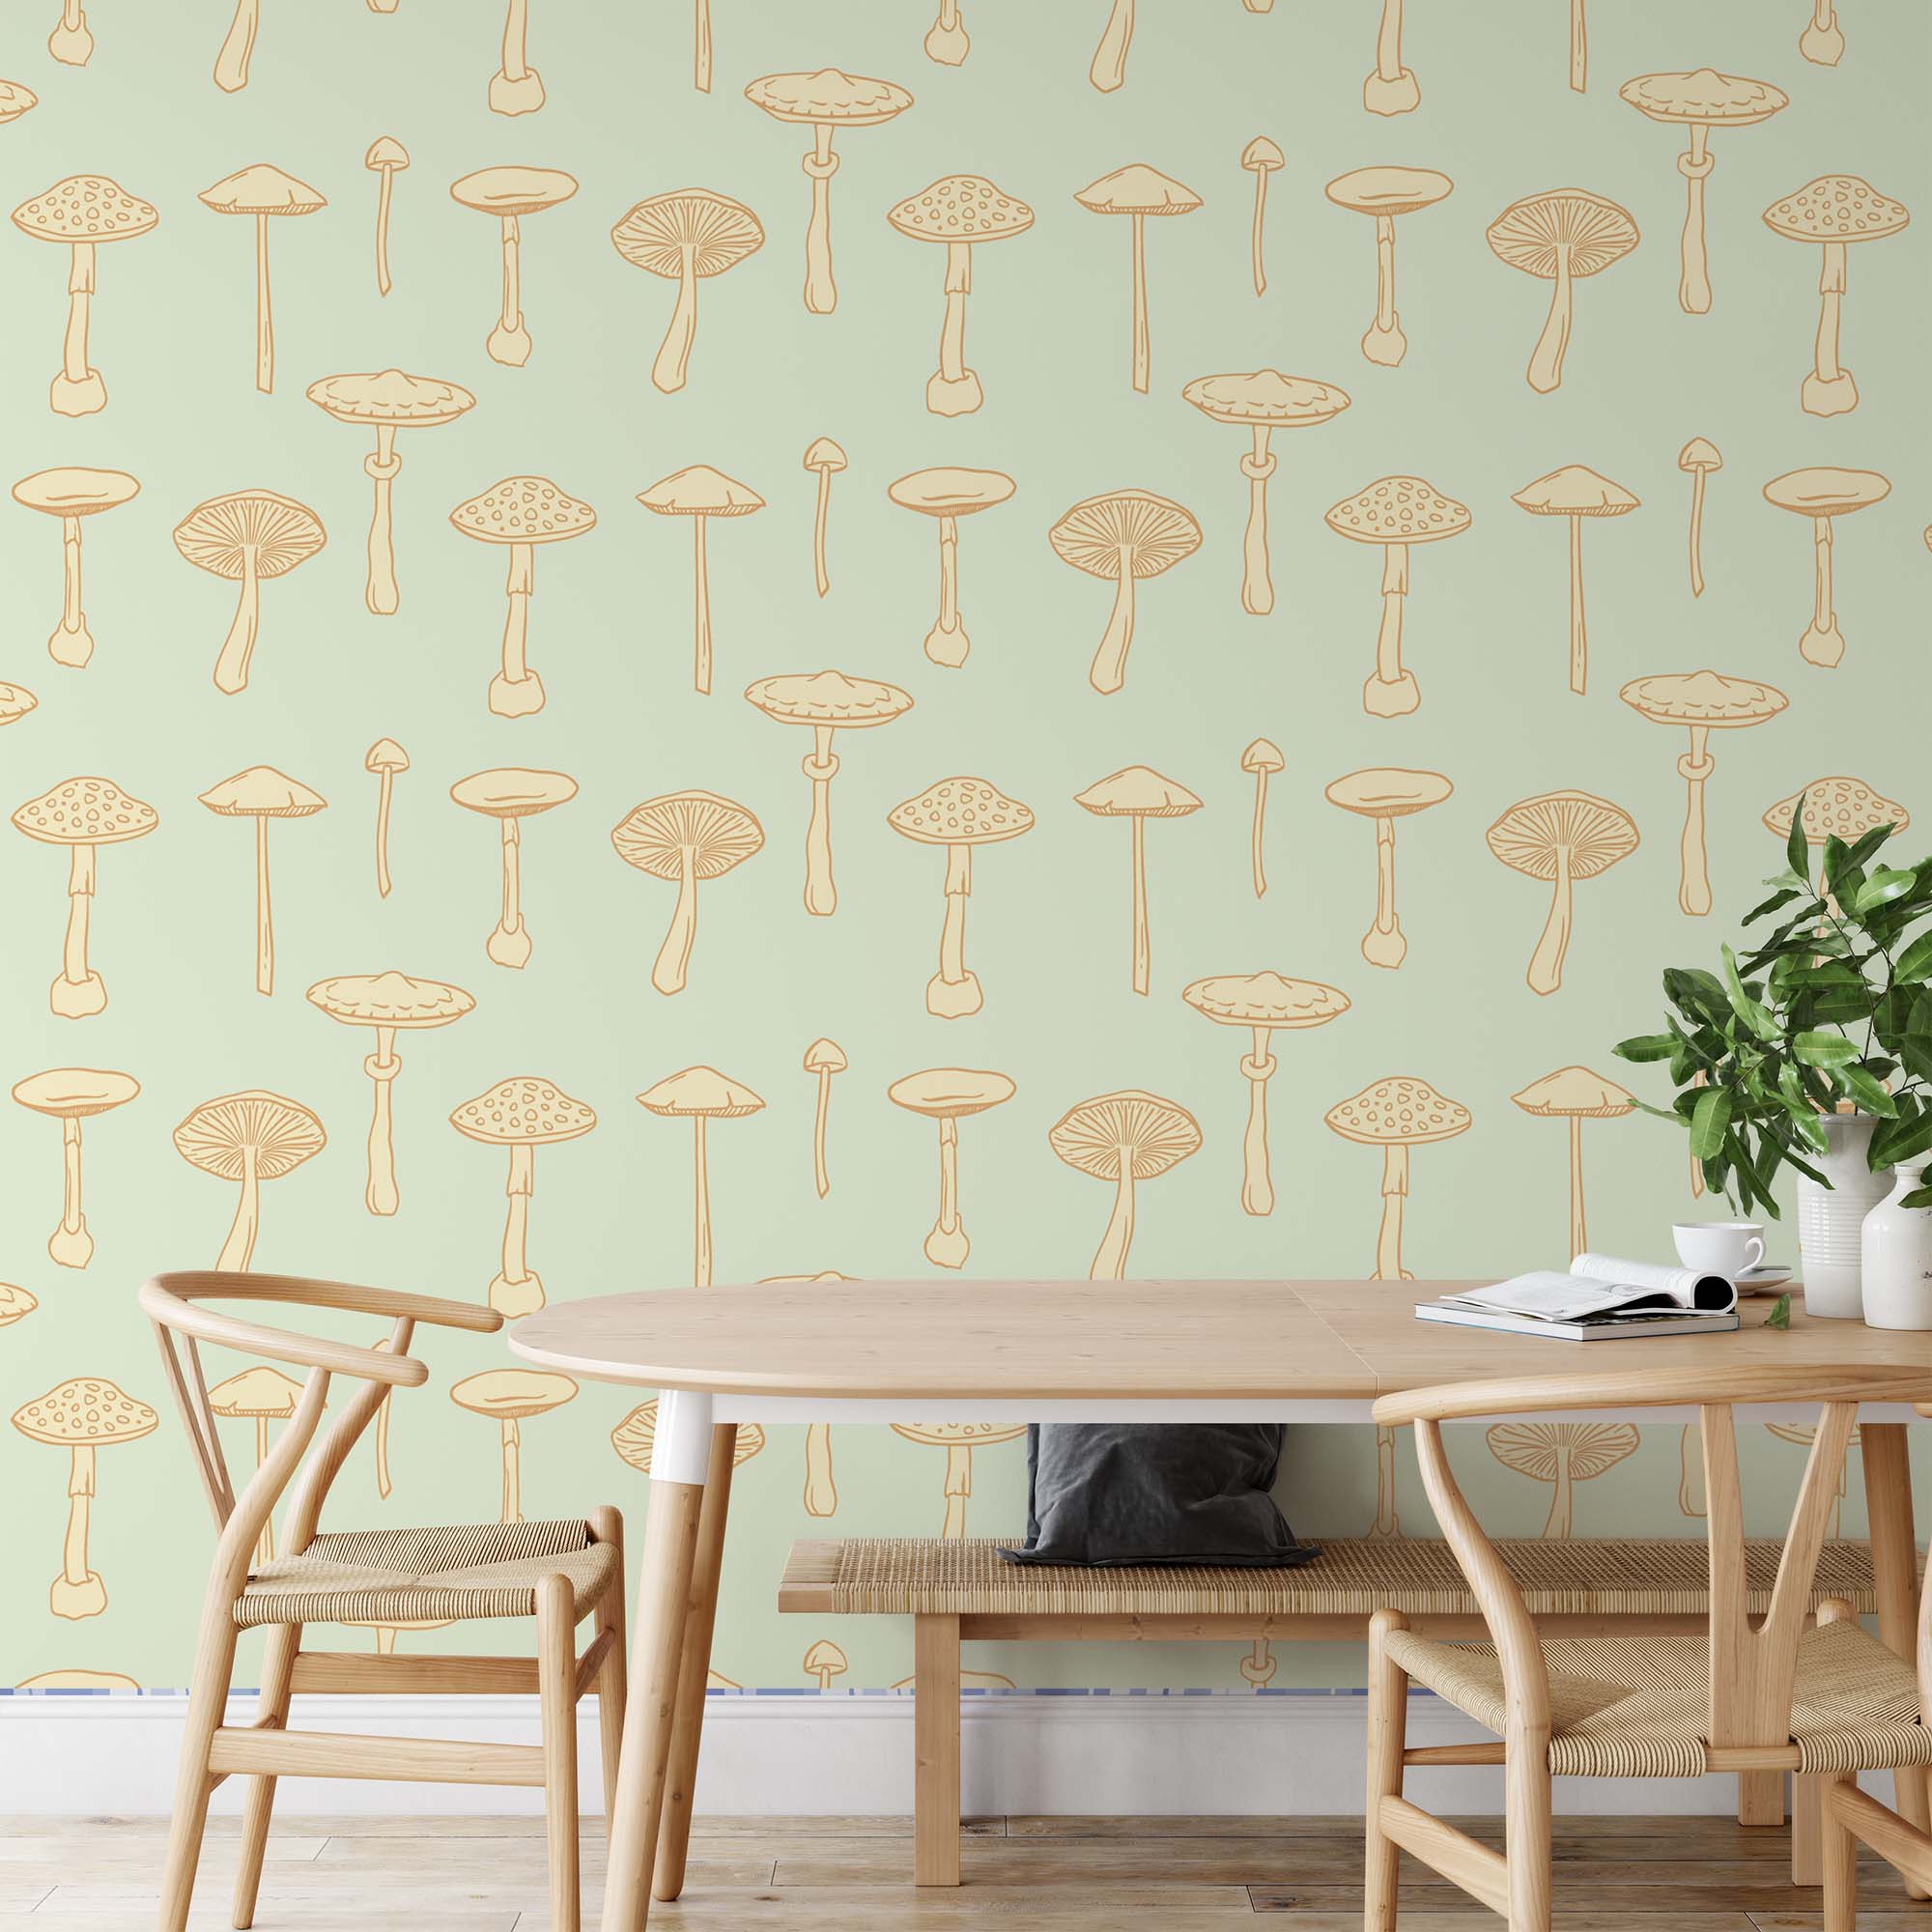 On the Surface: Will wallpaper stick to textured walls?